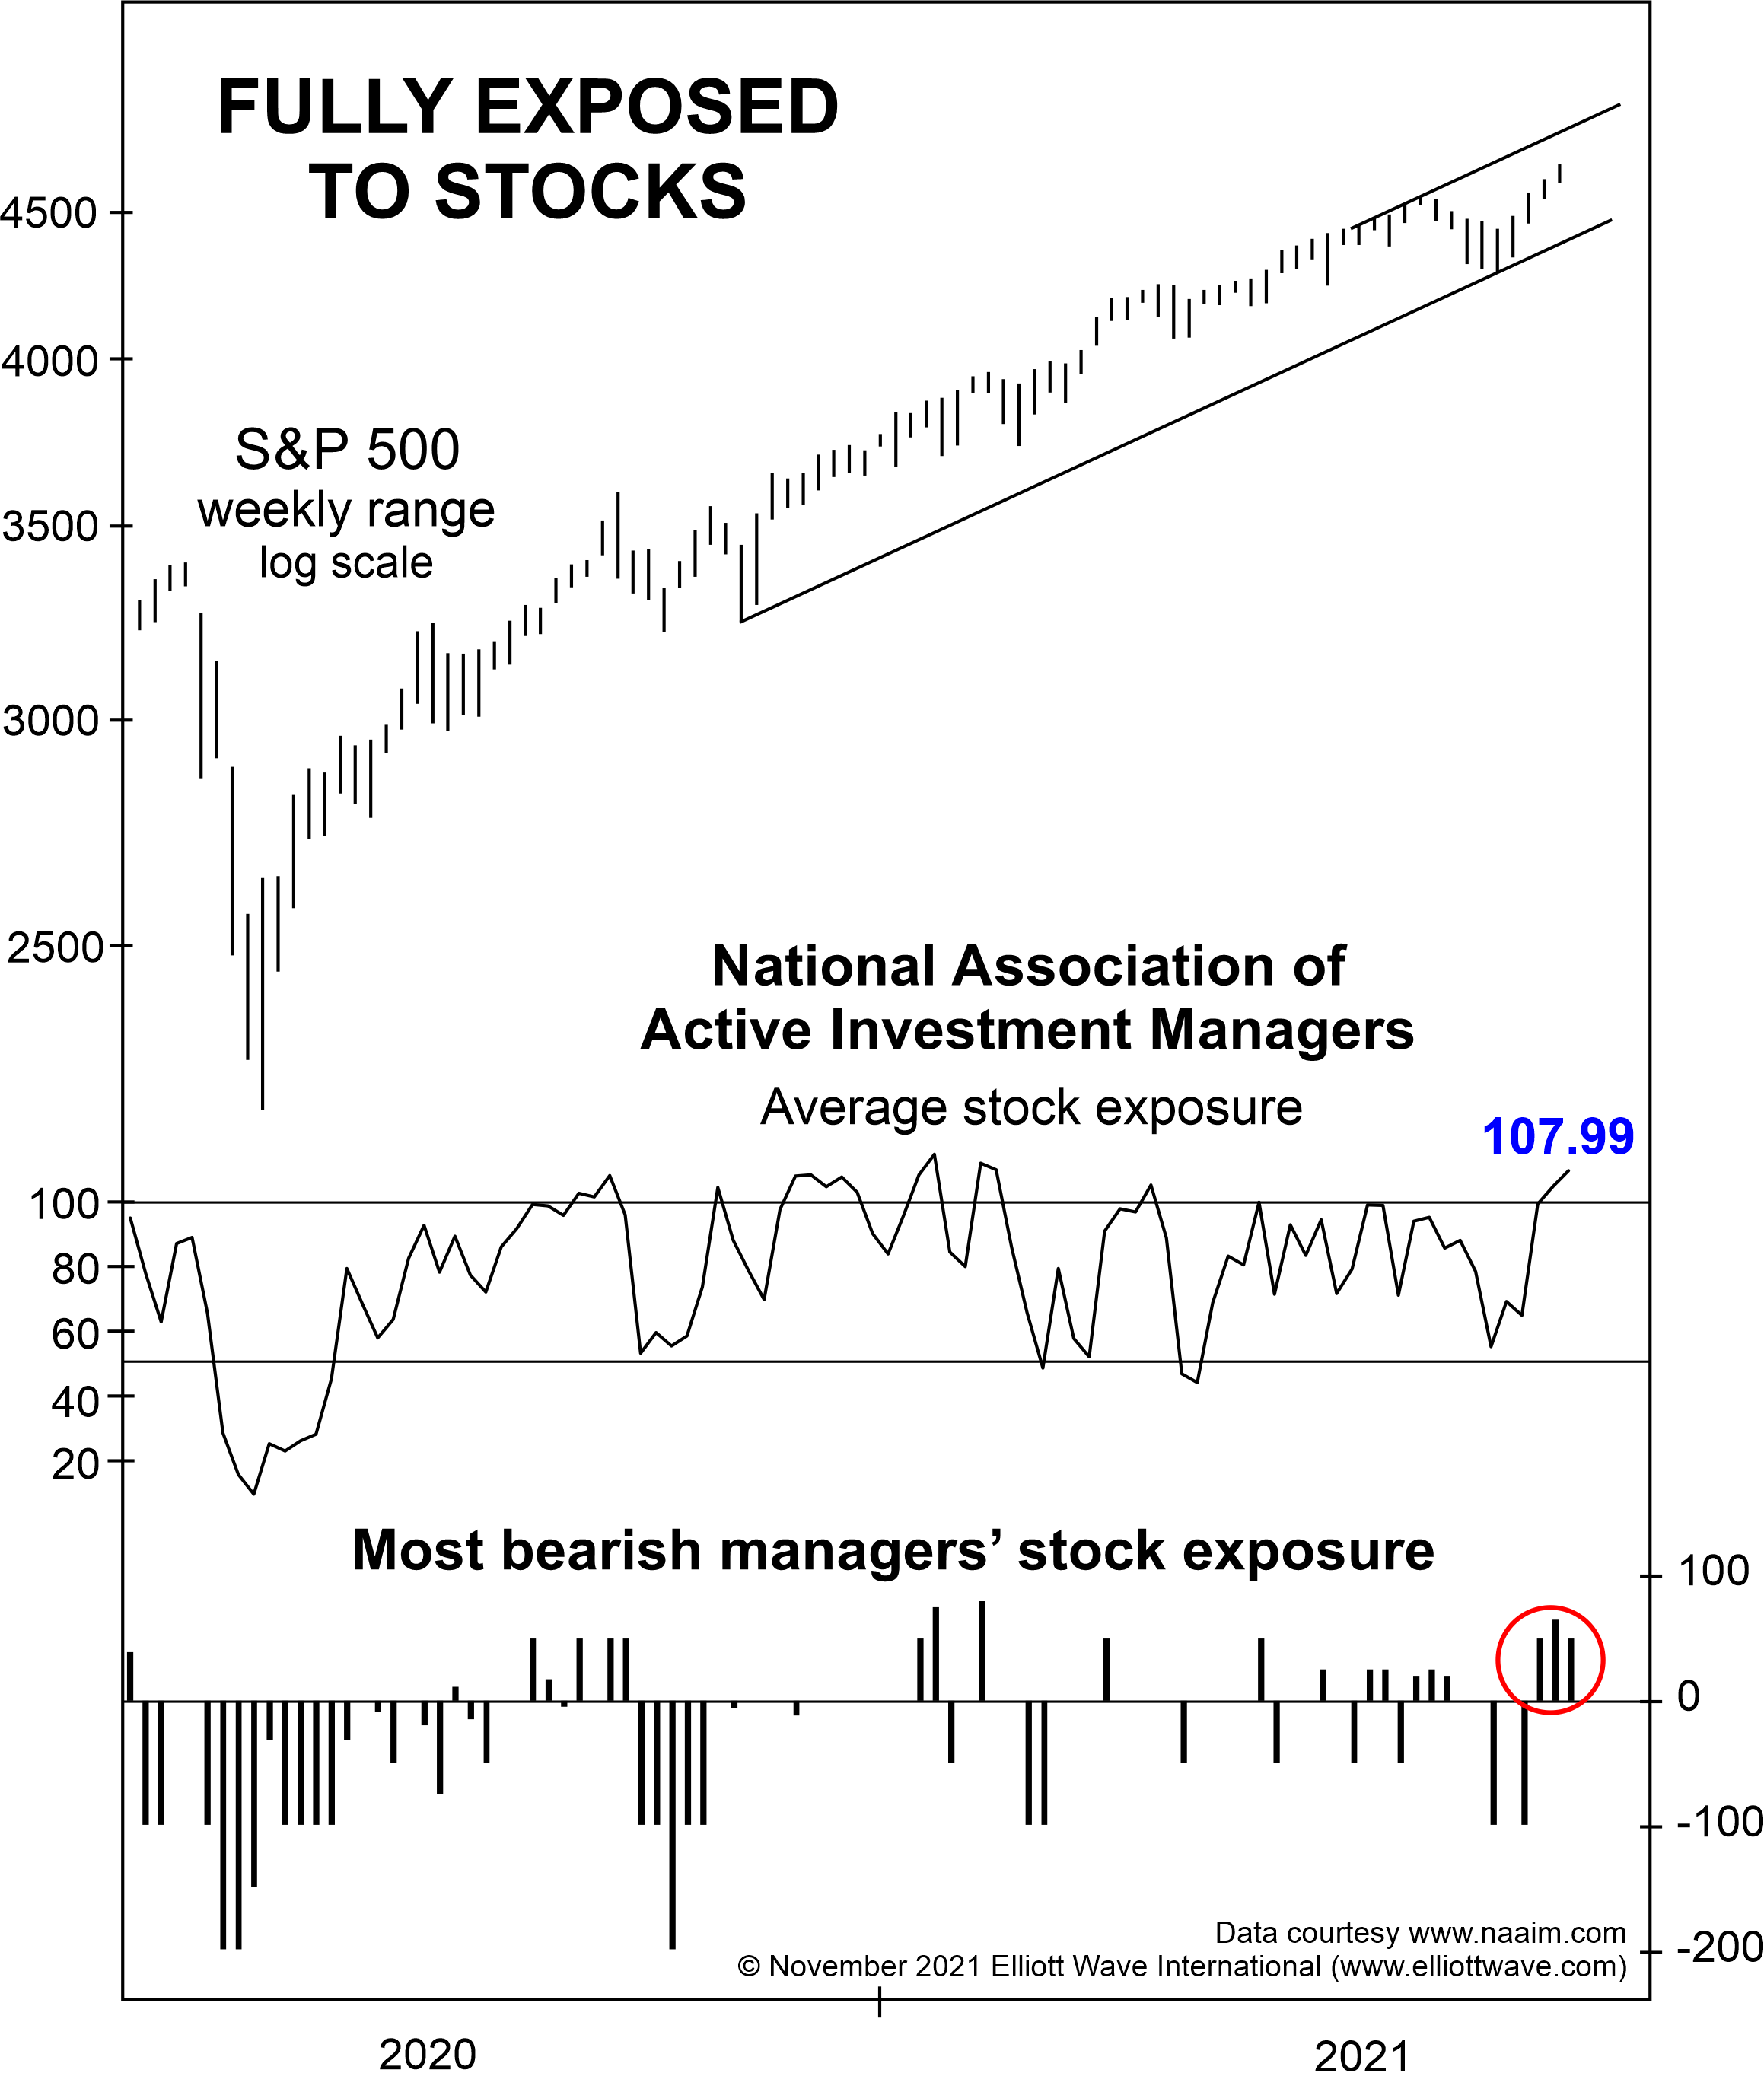 National Association of Active Investment Managers average stock exposure